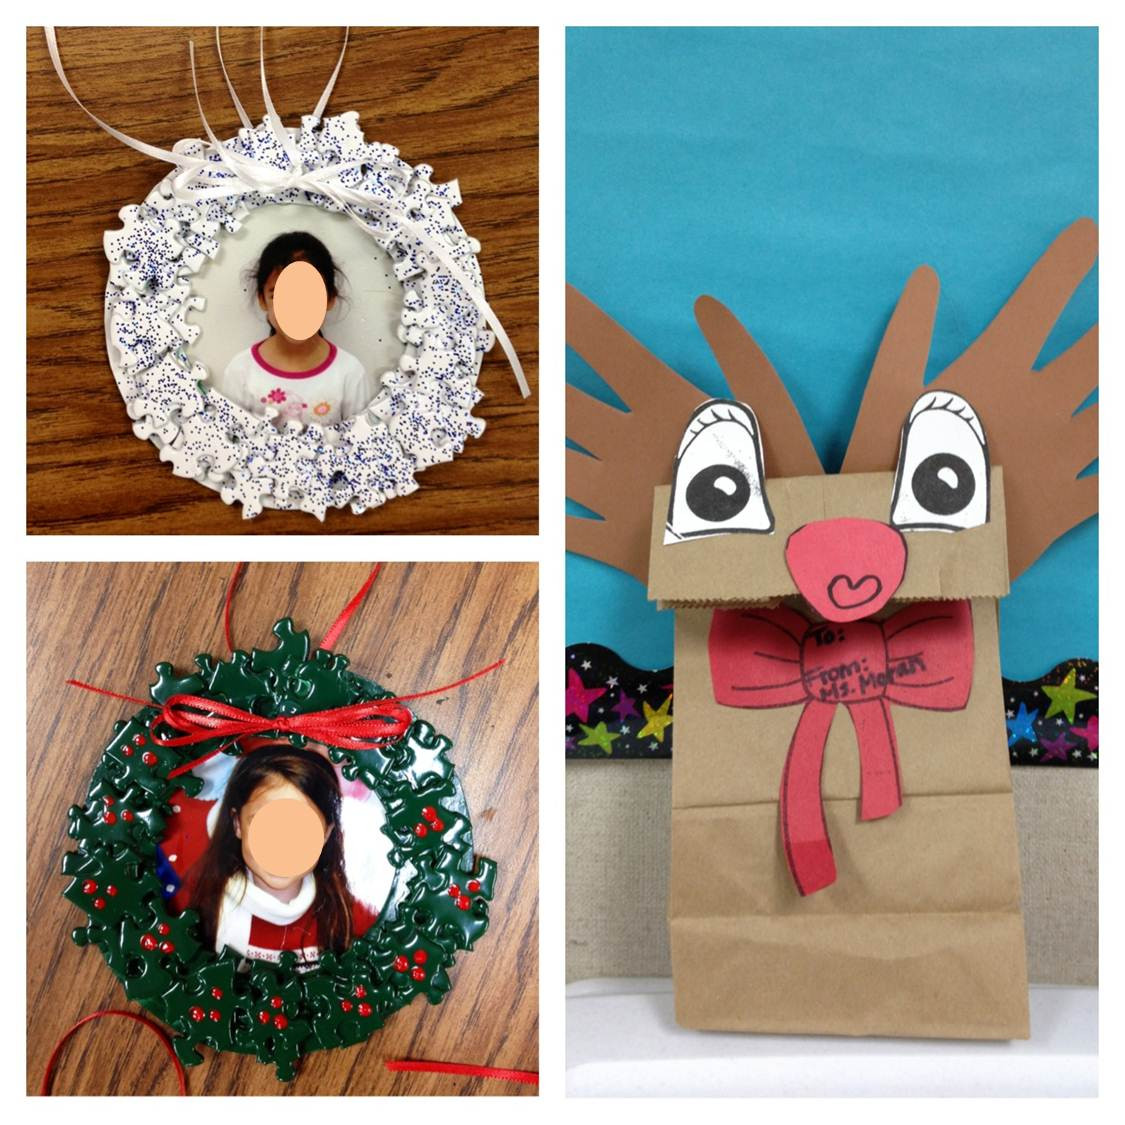 Christmas Gifts For Parents
 Susan Jones Teaching Parent & Student Holiday Gifts